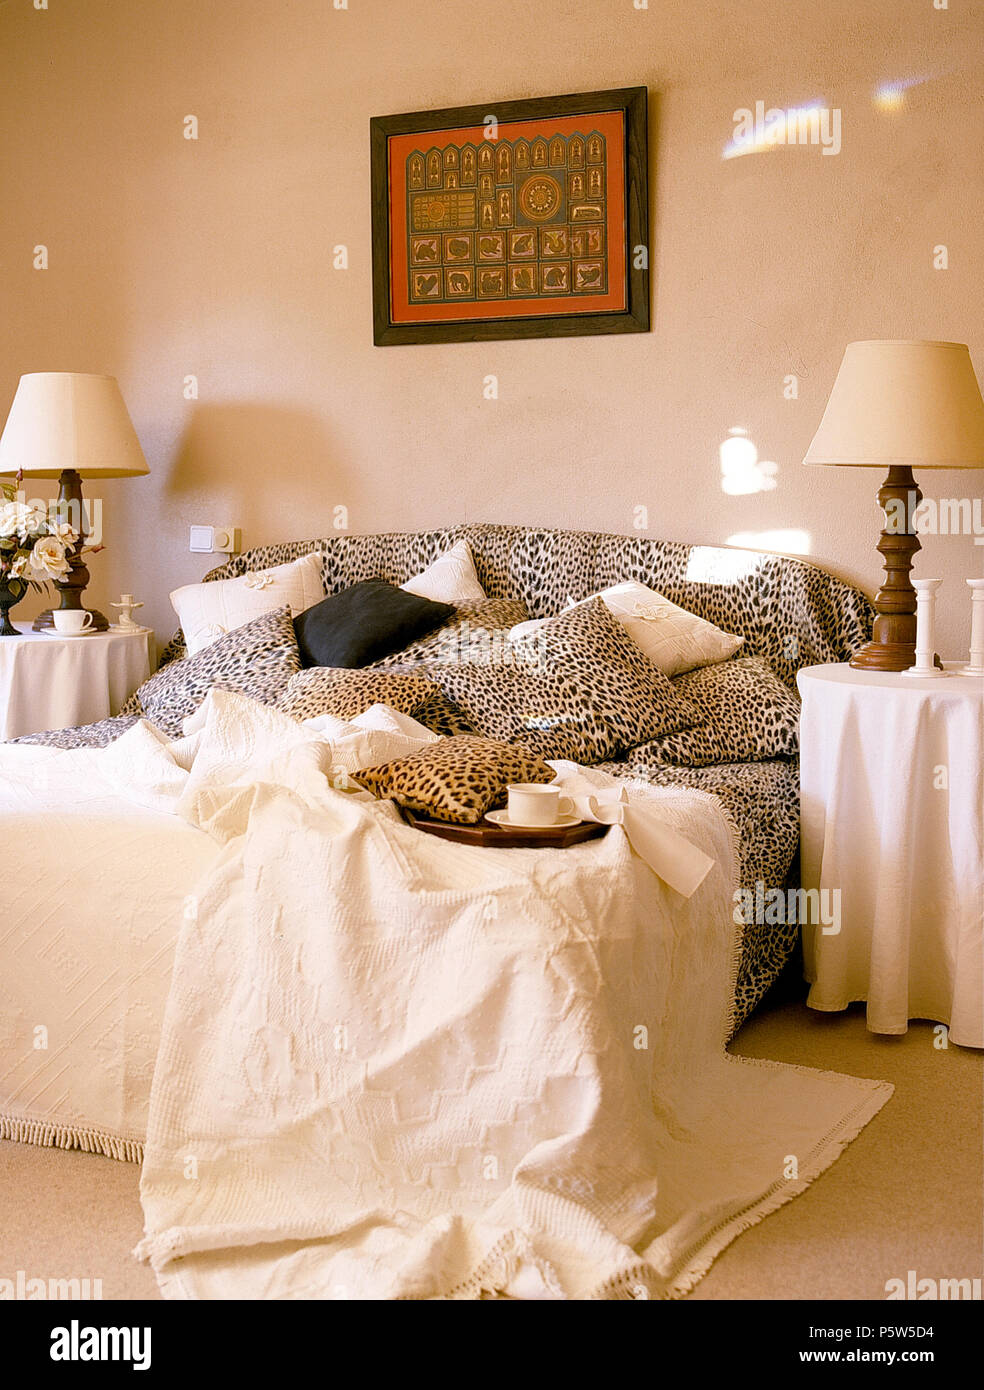 Bedroom with lamps on tables either side of double bed with leopard print bed linen and headboard with cream cotton bedspread Stock Photo